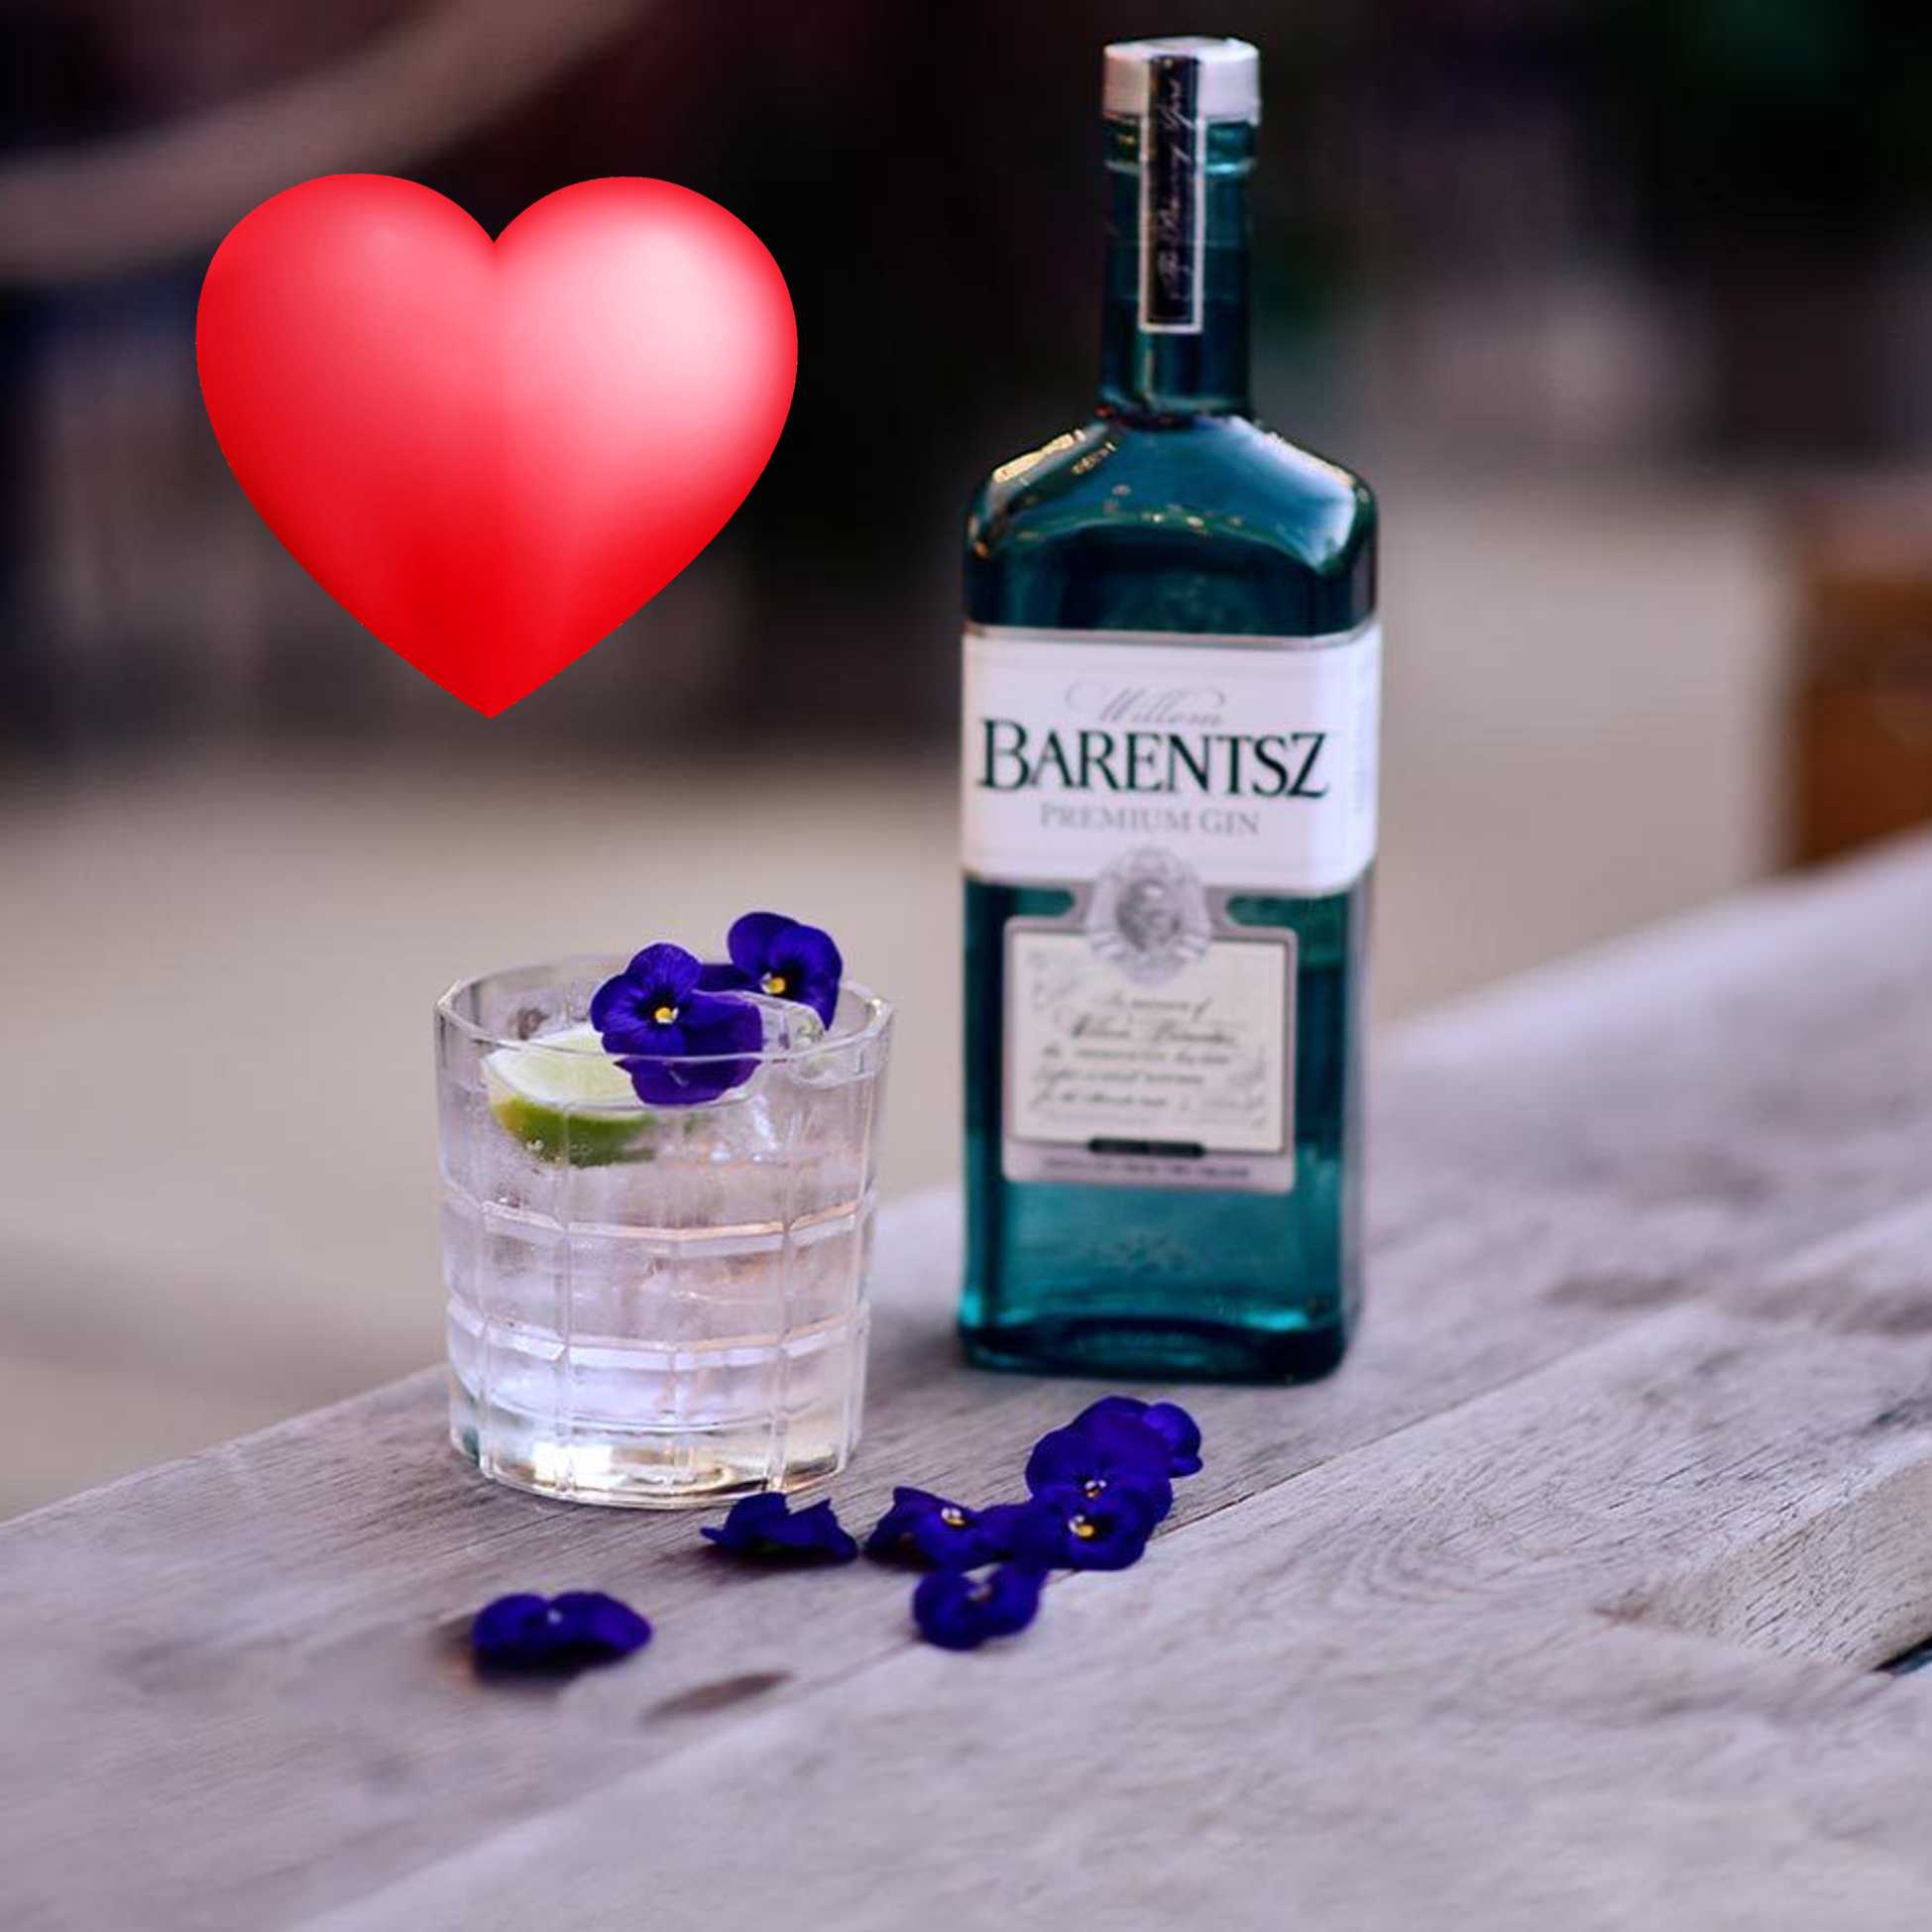 Is a gin cocktail good to serve at a wedding?